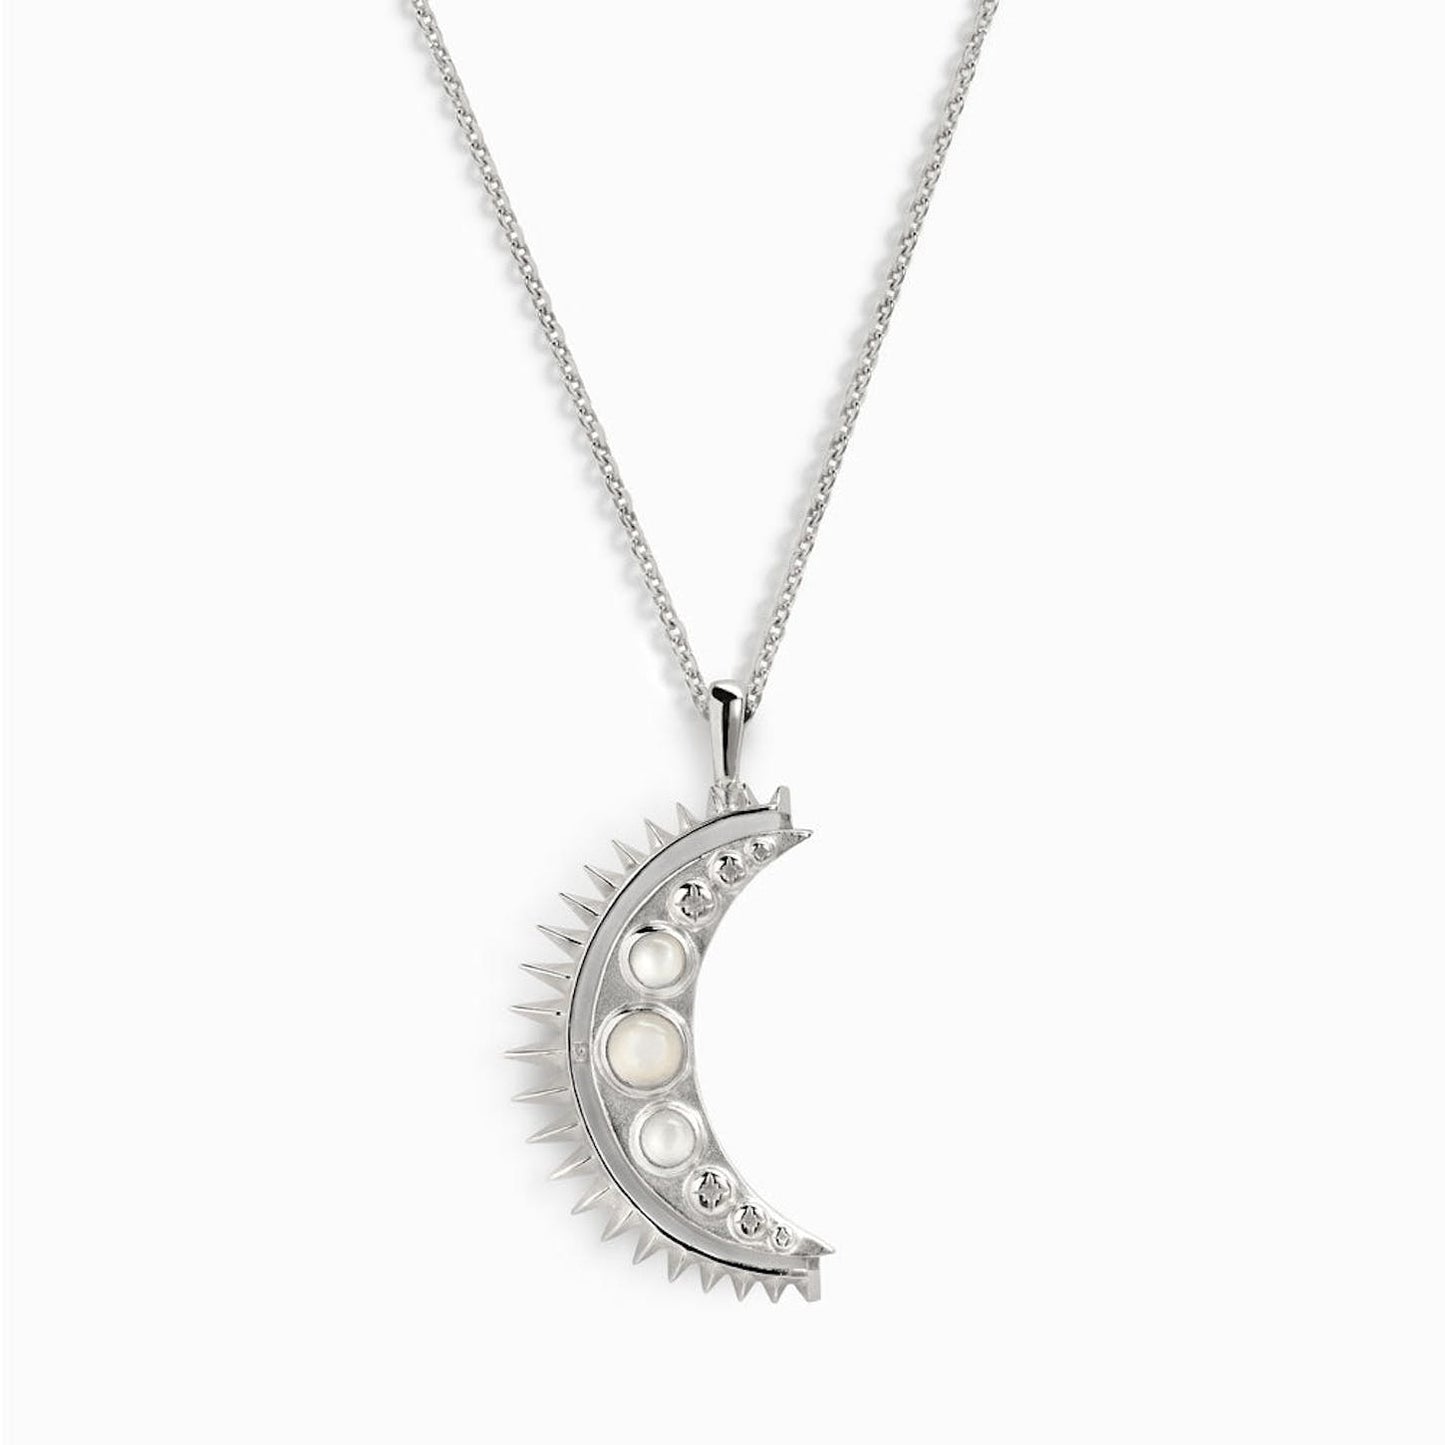 AWE Inspired Moonstone Crescent Necklace